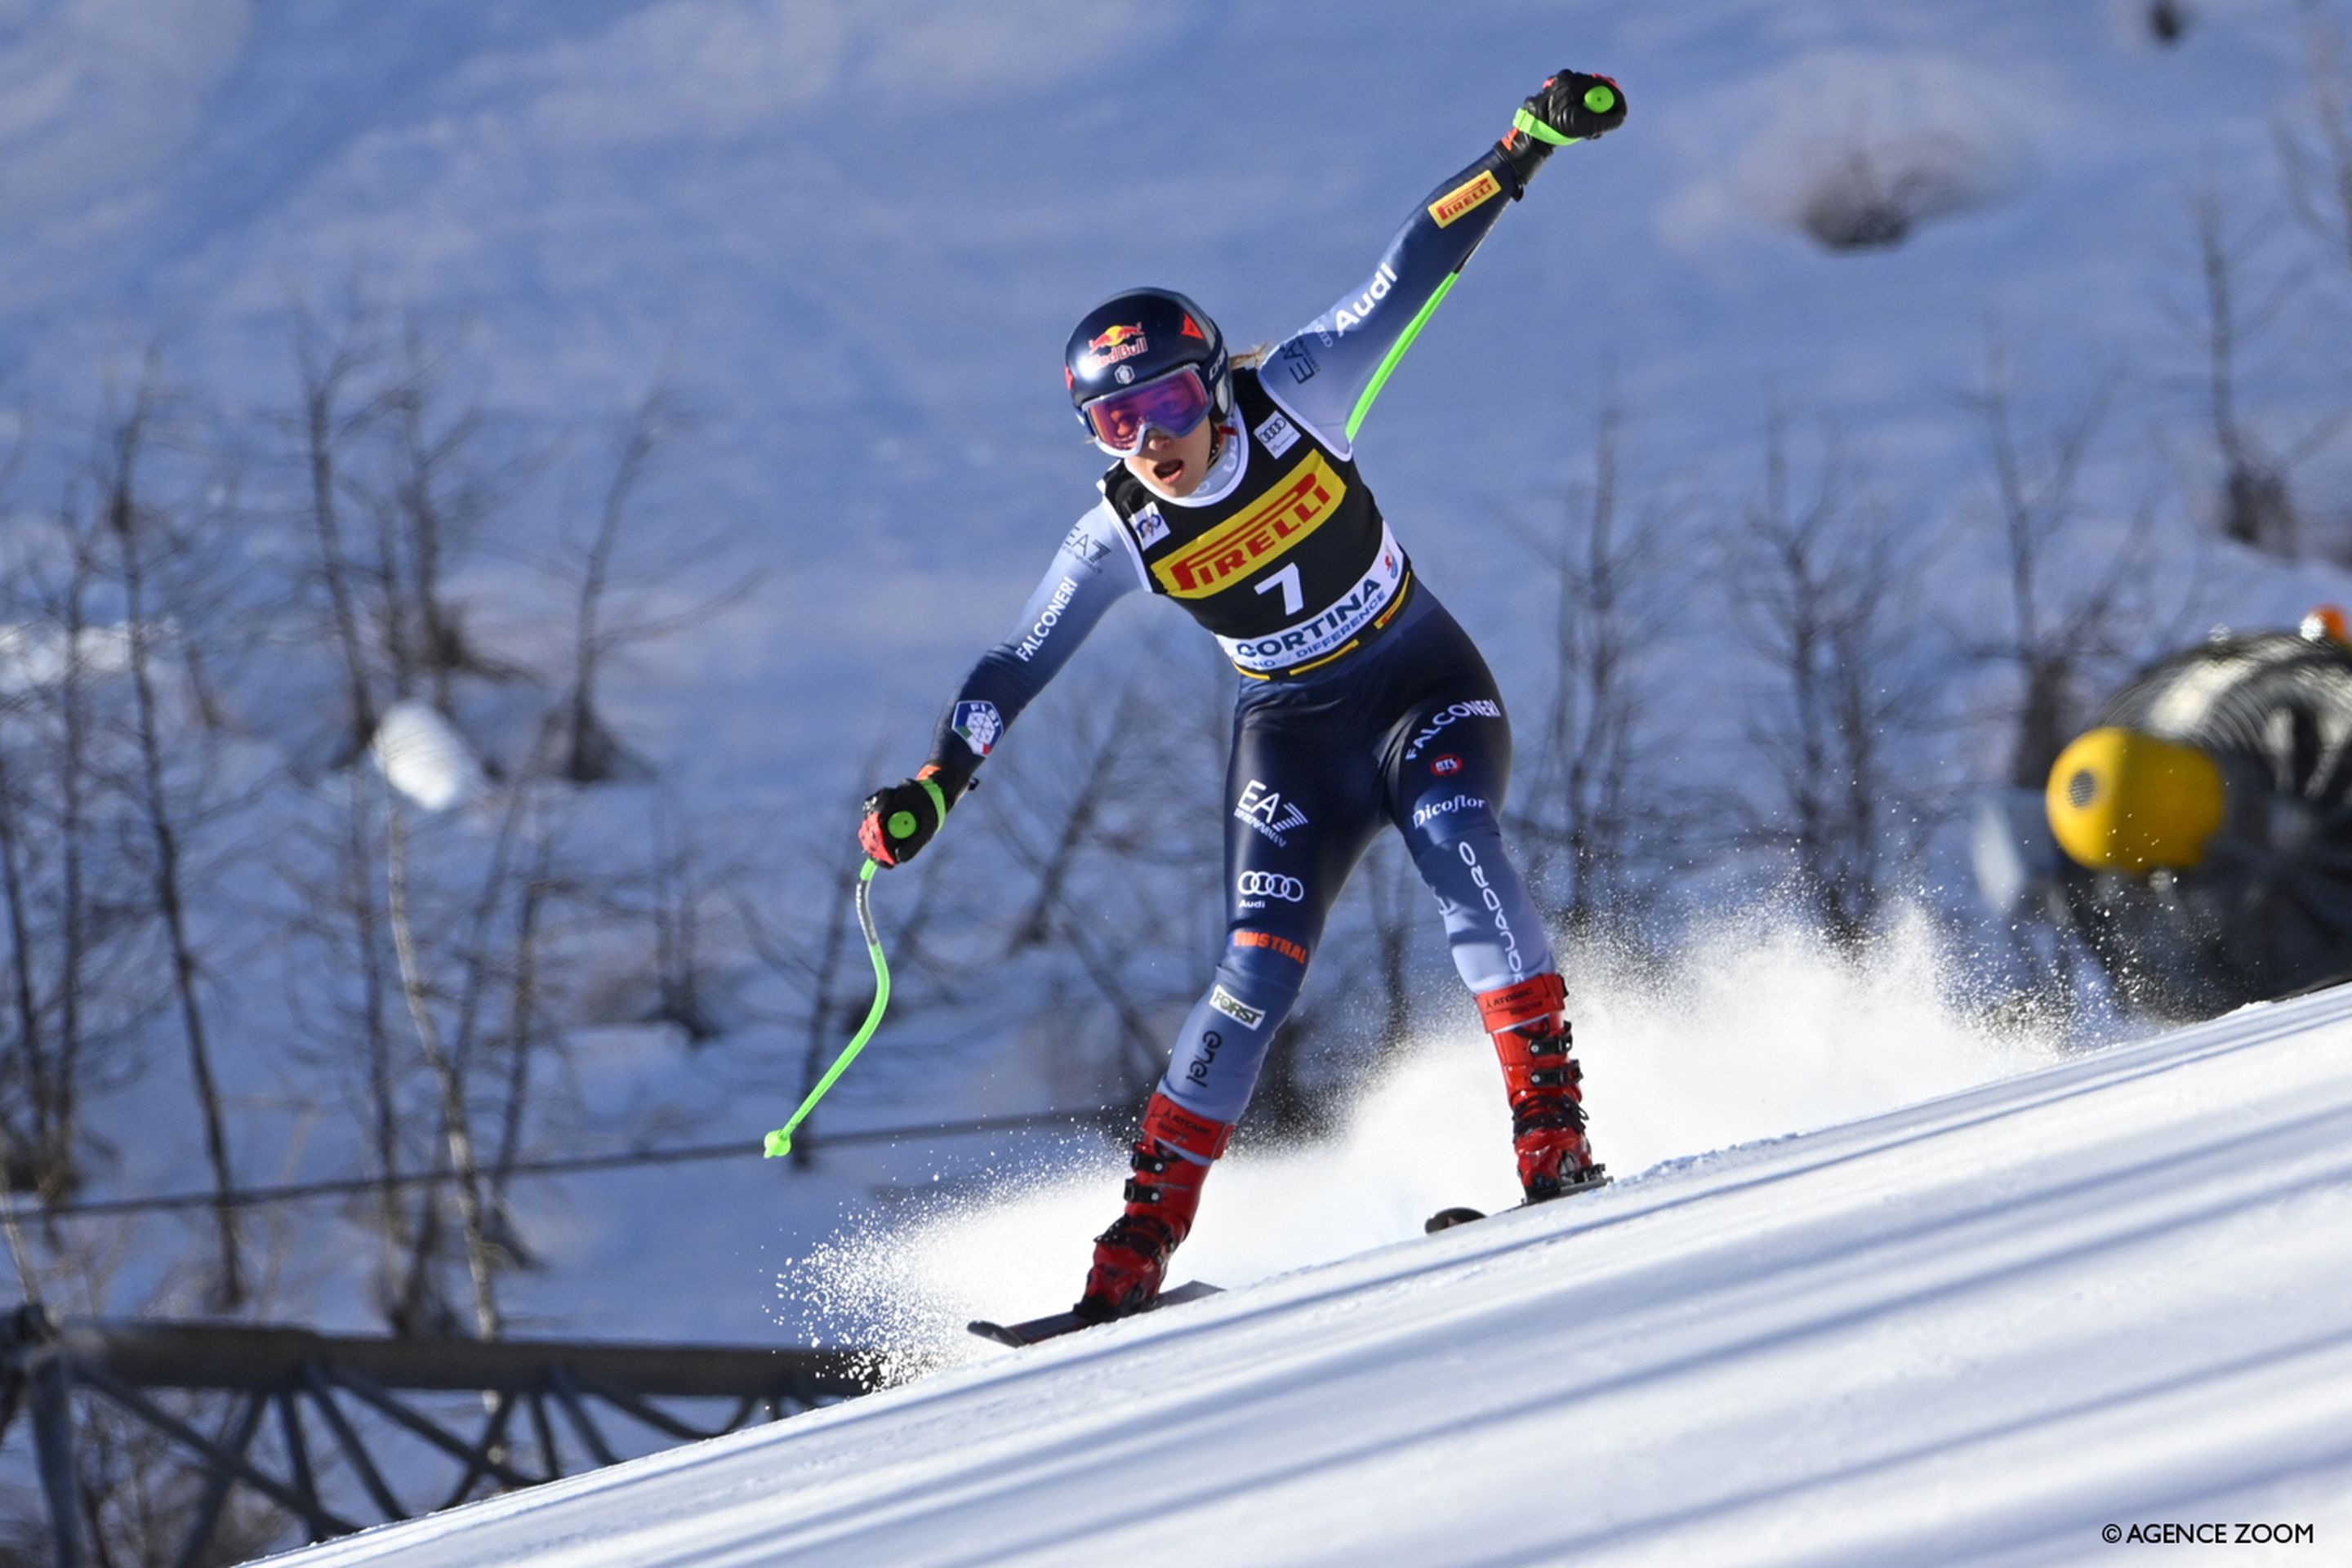 Goggia finishes fifth in Sunday's super-G (Agence Zoom)